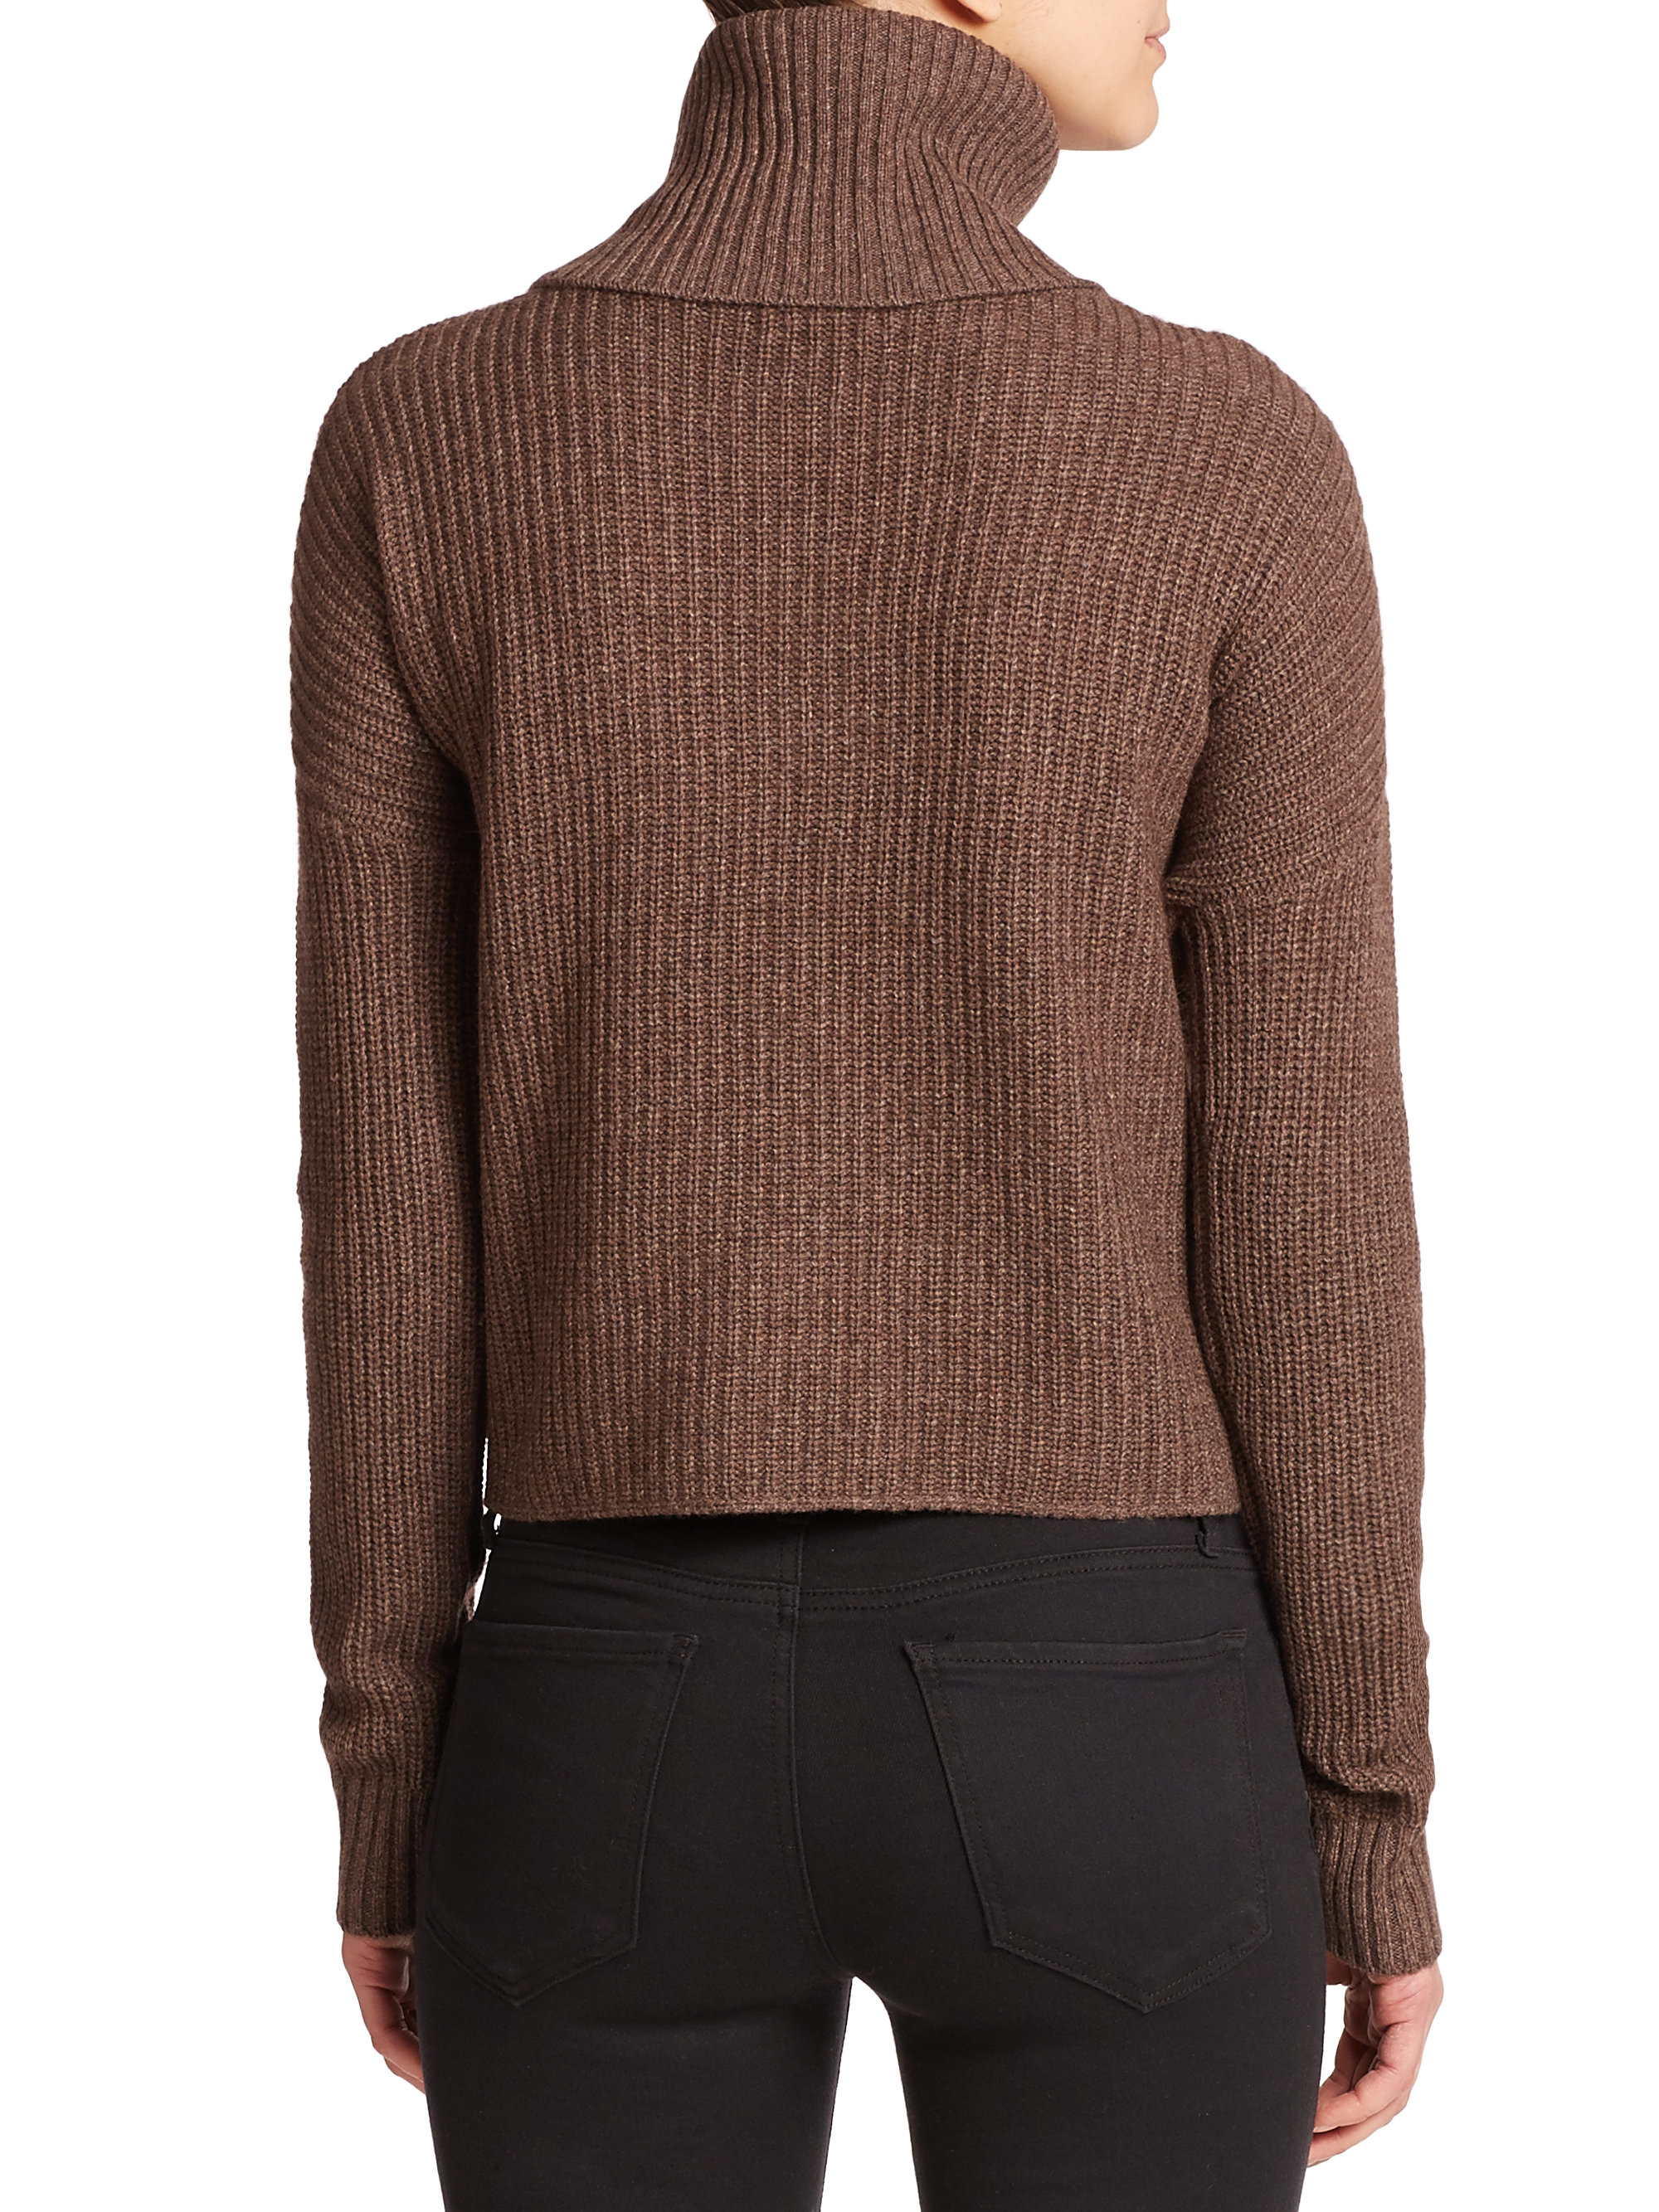 Joie Emette Ribbed Wool & Cashmere Turtleneck in Brown | Lyst